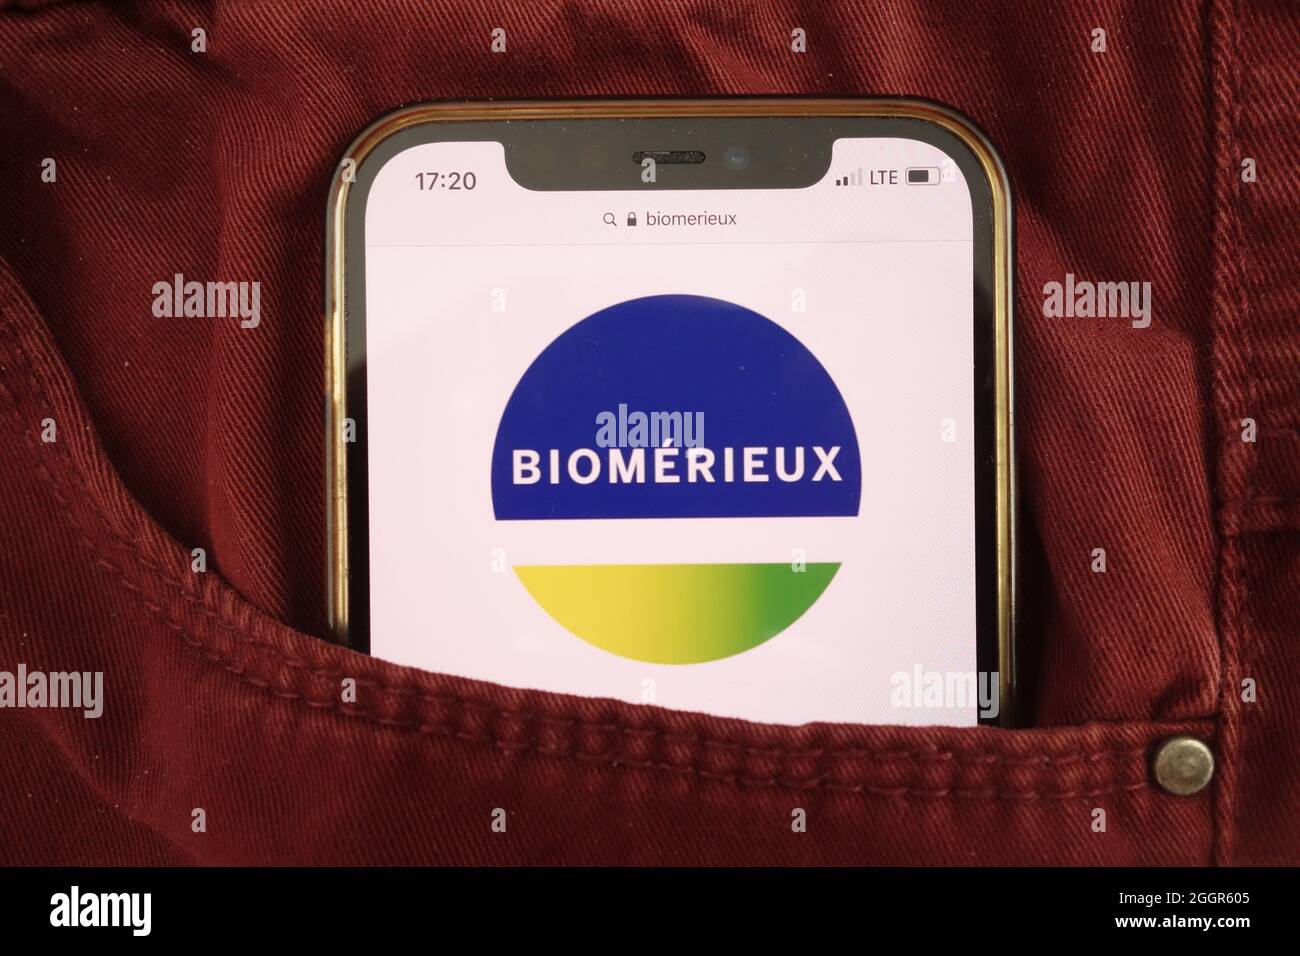 KONSKIE, POLAND - August 17, 2021: bioMerieux SA logo displayed on mobile  phone hidden in jeans pocket Stock Photo - Alamy